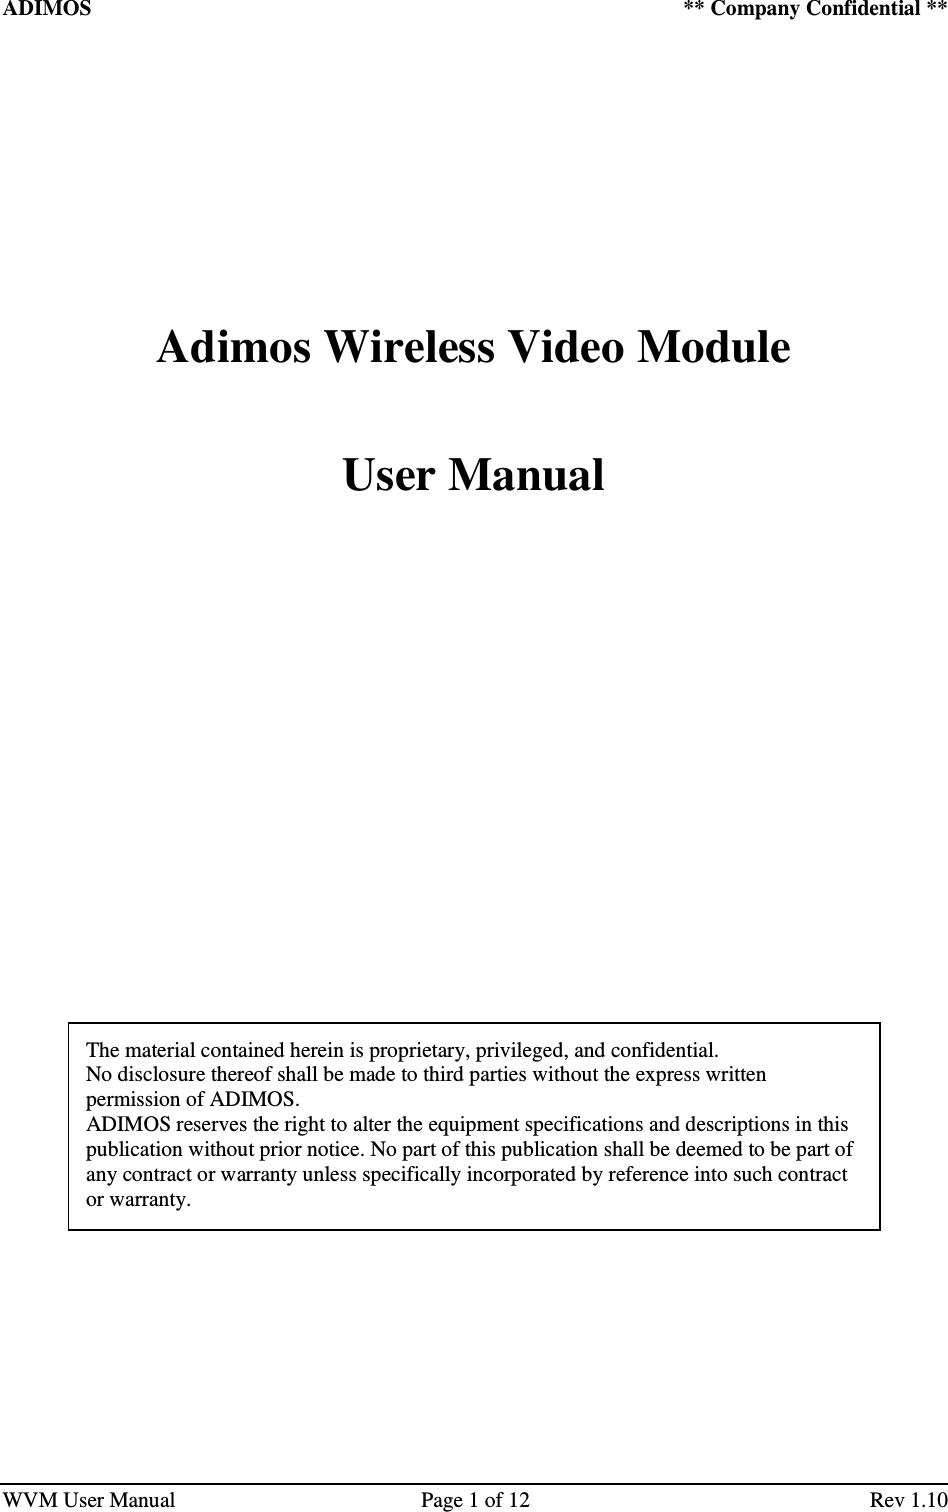 ADIMOS    ** Company Confidential **   WVM User Manual  Page 1 of 12  Rev 1.10           Adimos Wireless Video Module      User Manual                        The material contained herein is proprietary, privileged, and confidential.  No disclosure thereof shall be made to third parties without the express written permission of ADIMOS. ADIMOS reserves the right to alter the equipment specifications and descriptions in this publication without prior notice. No part of this publication shall be deemed to be part of any contract or warranty unless specifically incorporated by reference into such contract or warranty. 